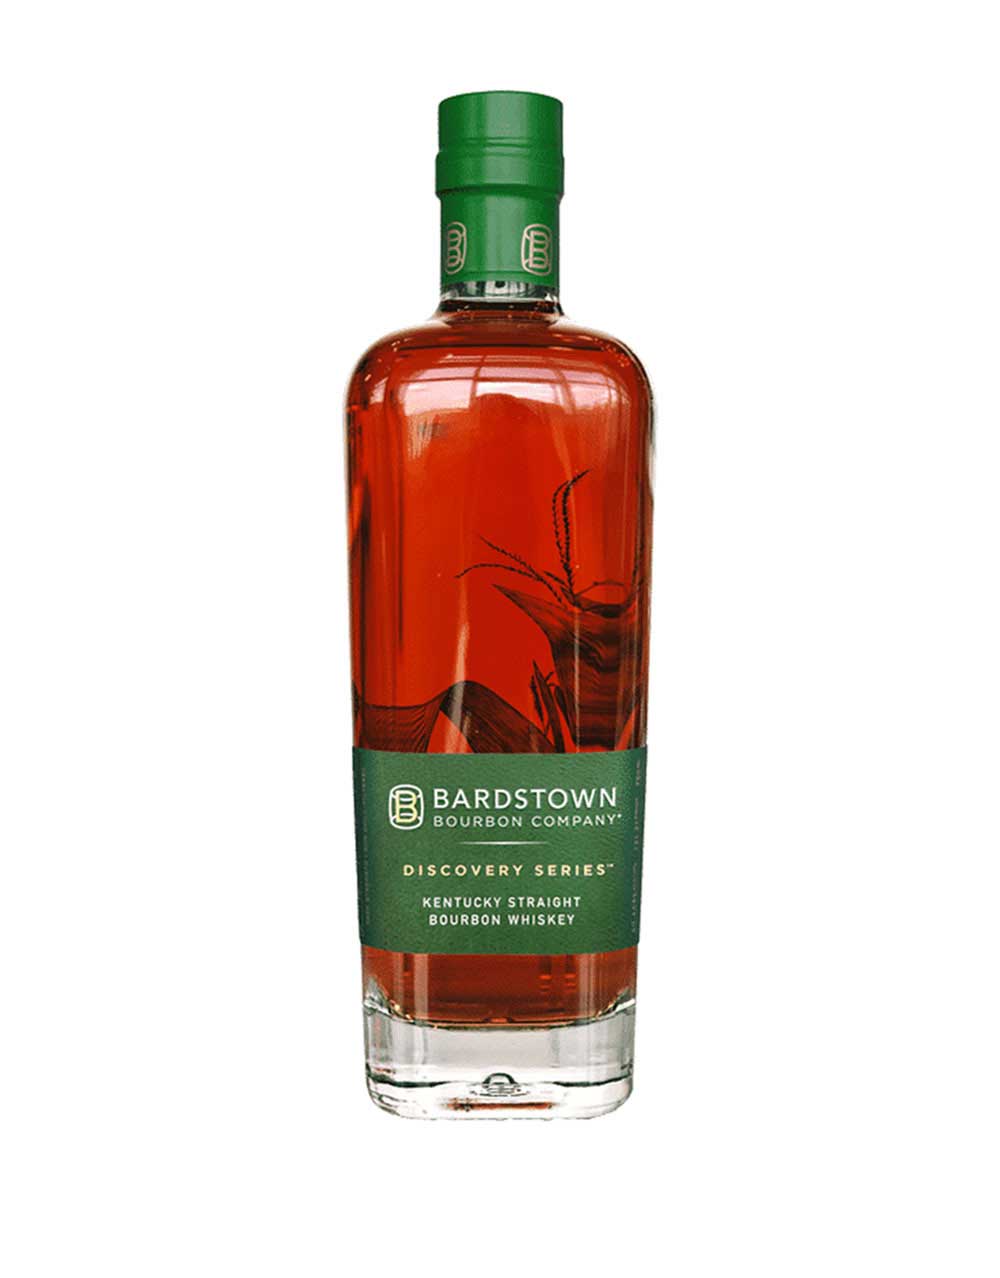 Bardstown Bourbon Company Discovery Series 1 Kentucky Straight Bourbon Whiskey